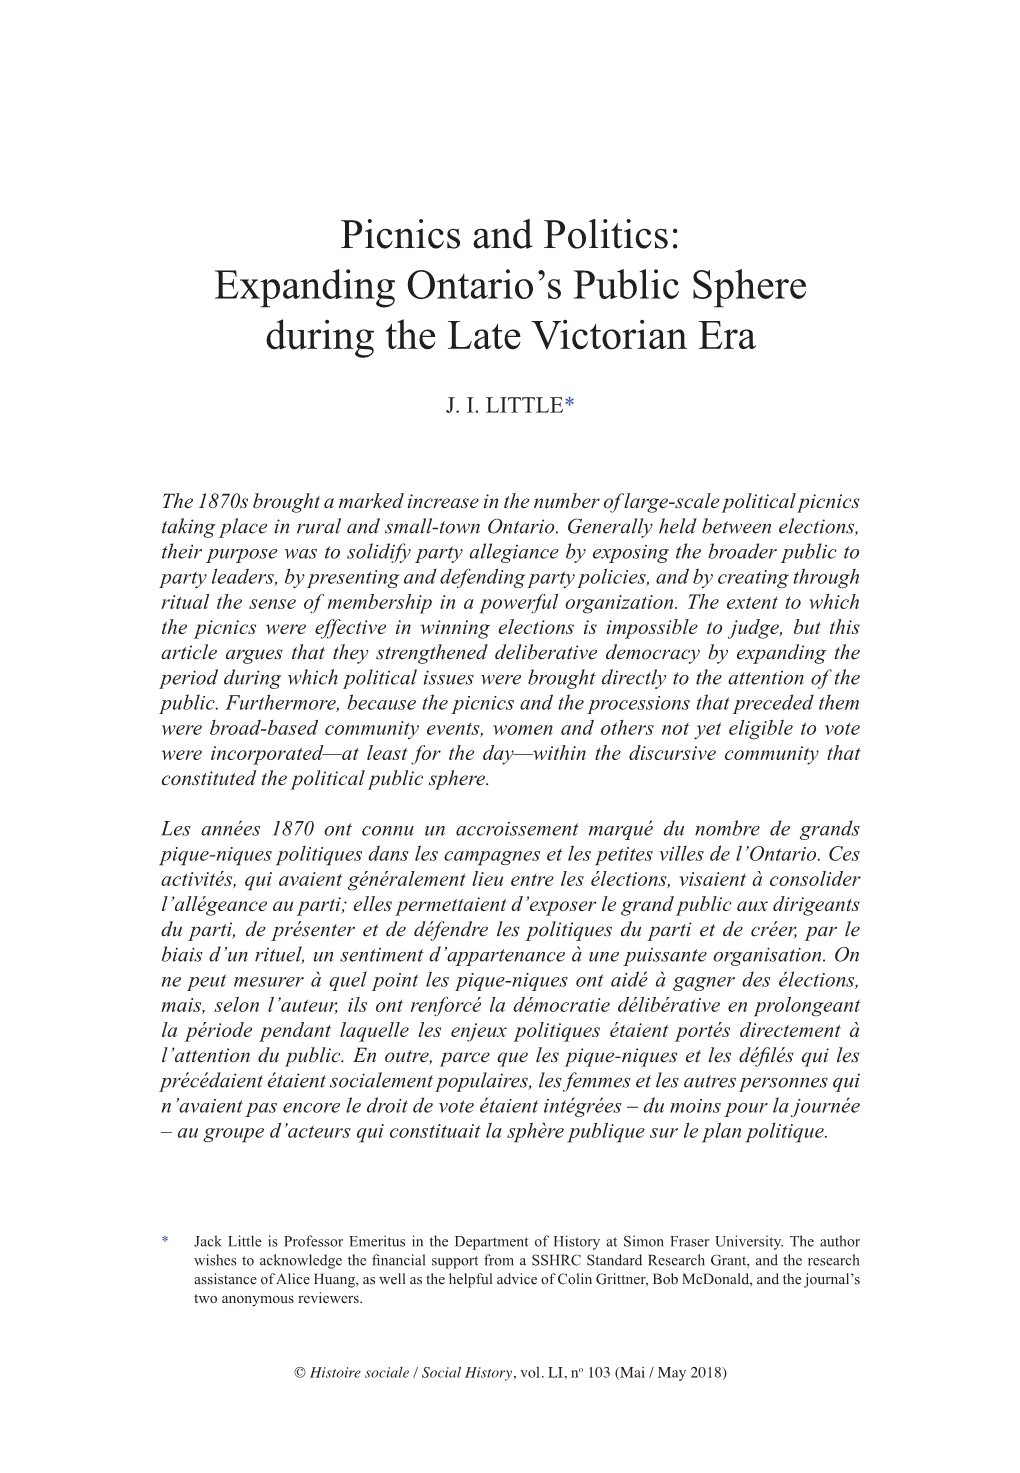 Picnics and Politics: Expanding Ontario's Public Sphere During The